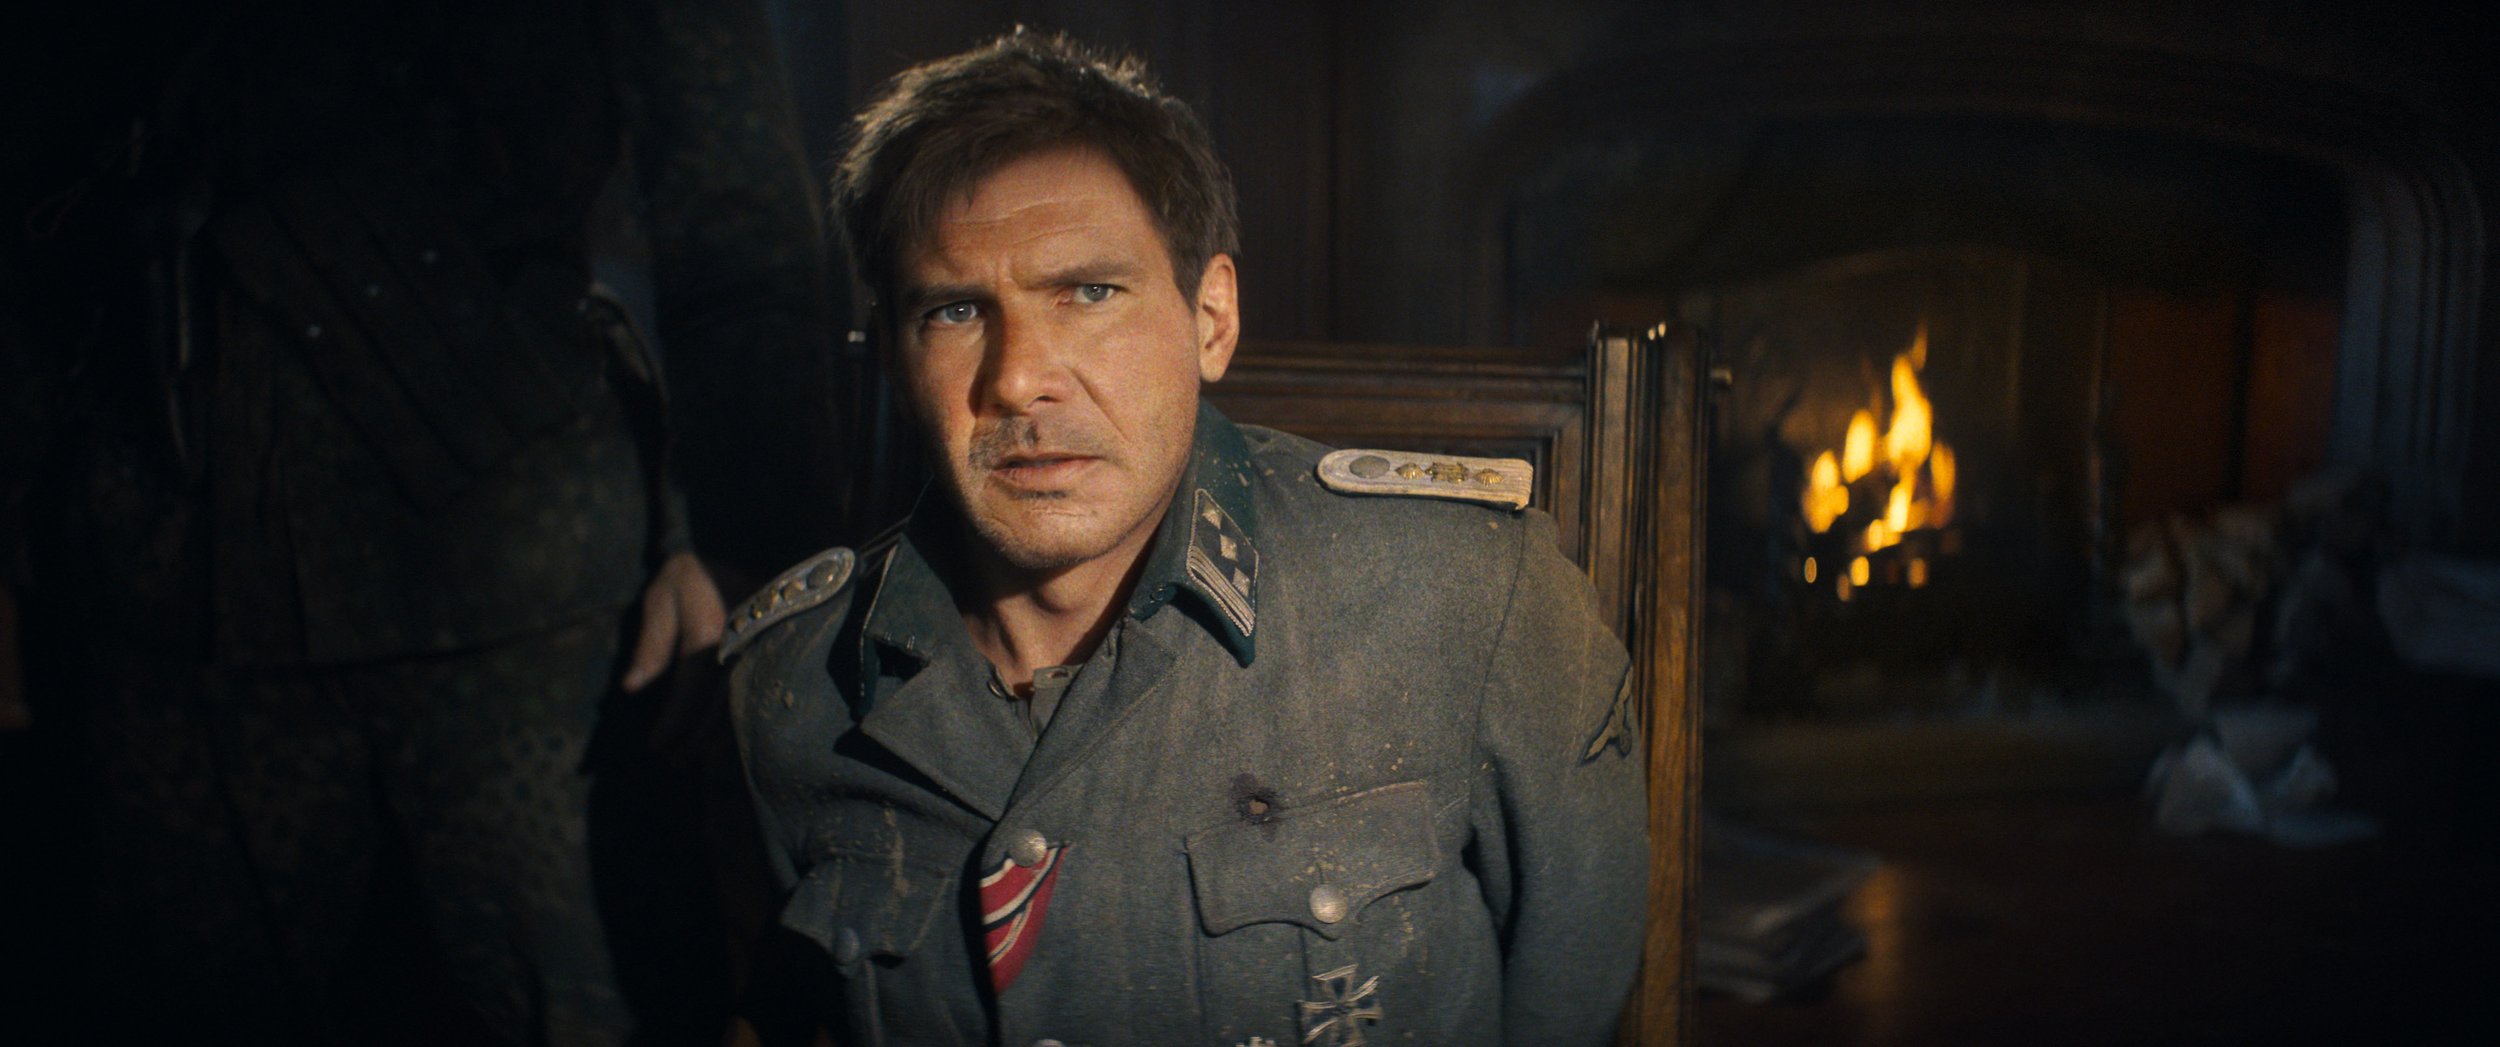  Indiana Jones (Harrison Ford) in Lucasfilm's IJ5. ©2022 Lucasfilm Ltd. & TM. All Rights Reserved. 